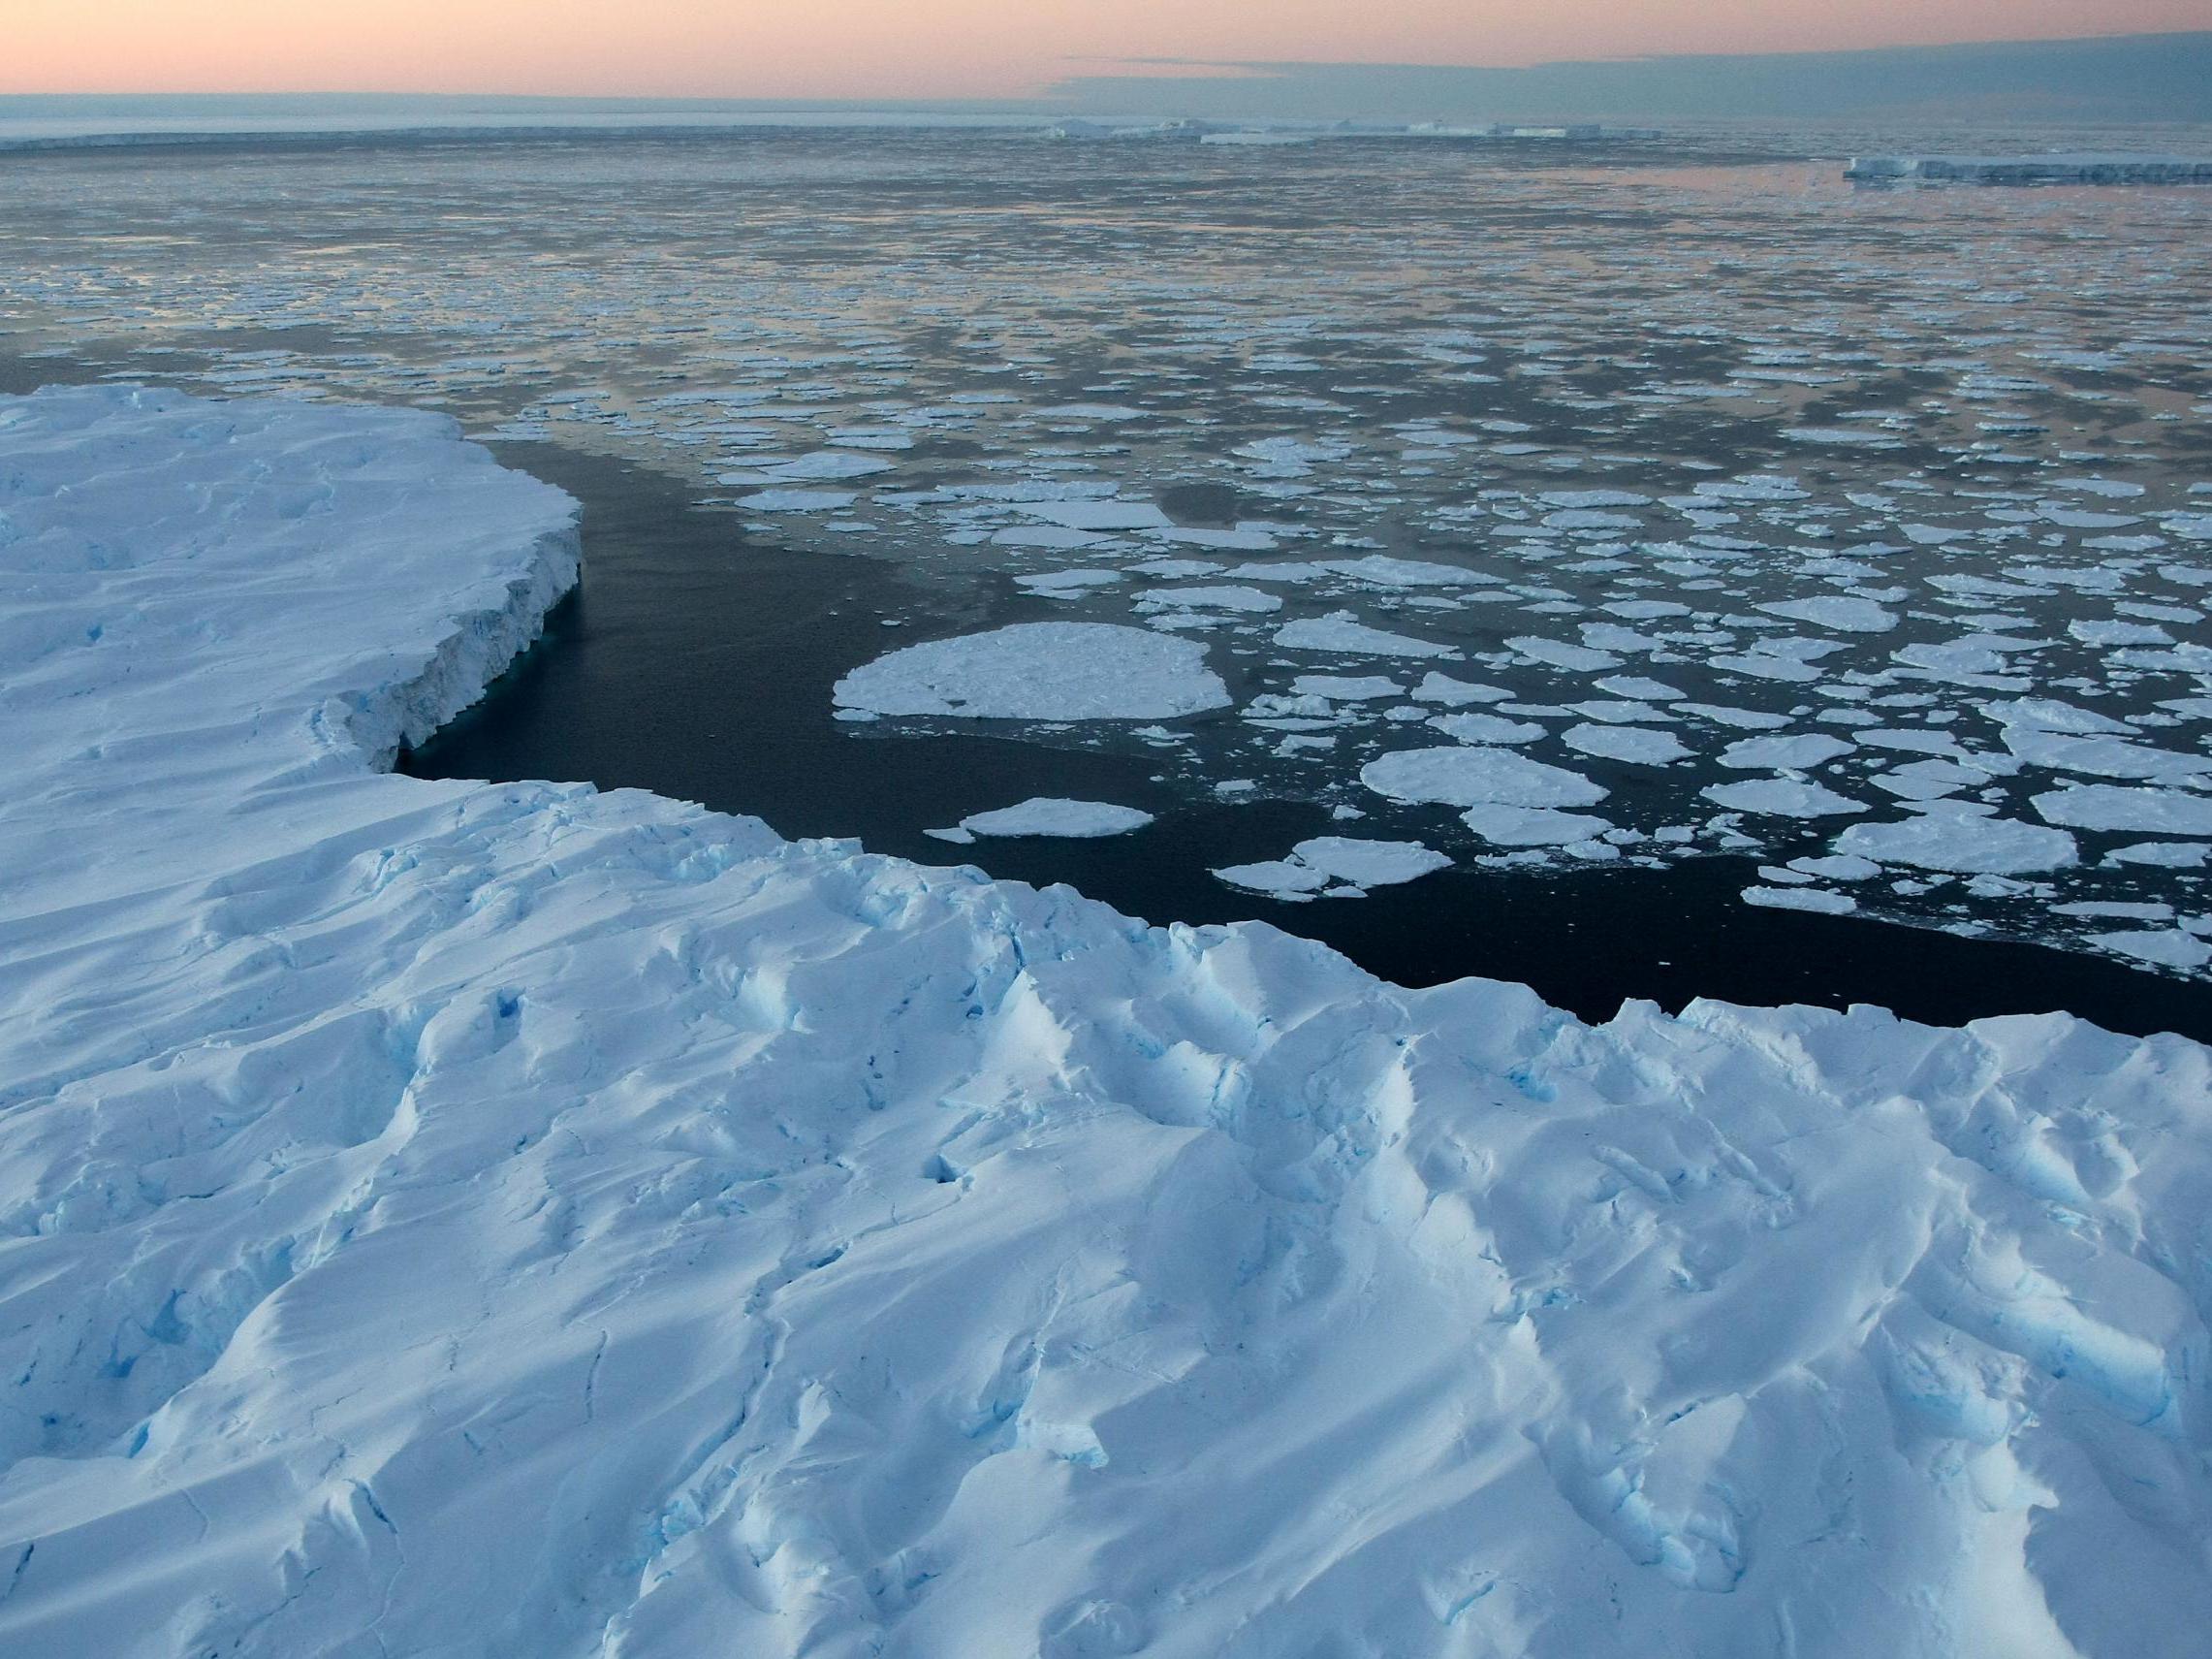 Microplastics have been found in Antarctic sea ice for the first time, researchers believe